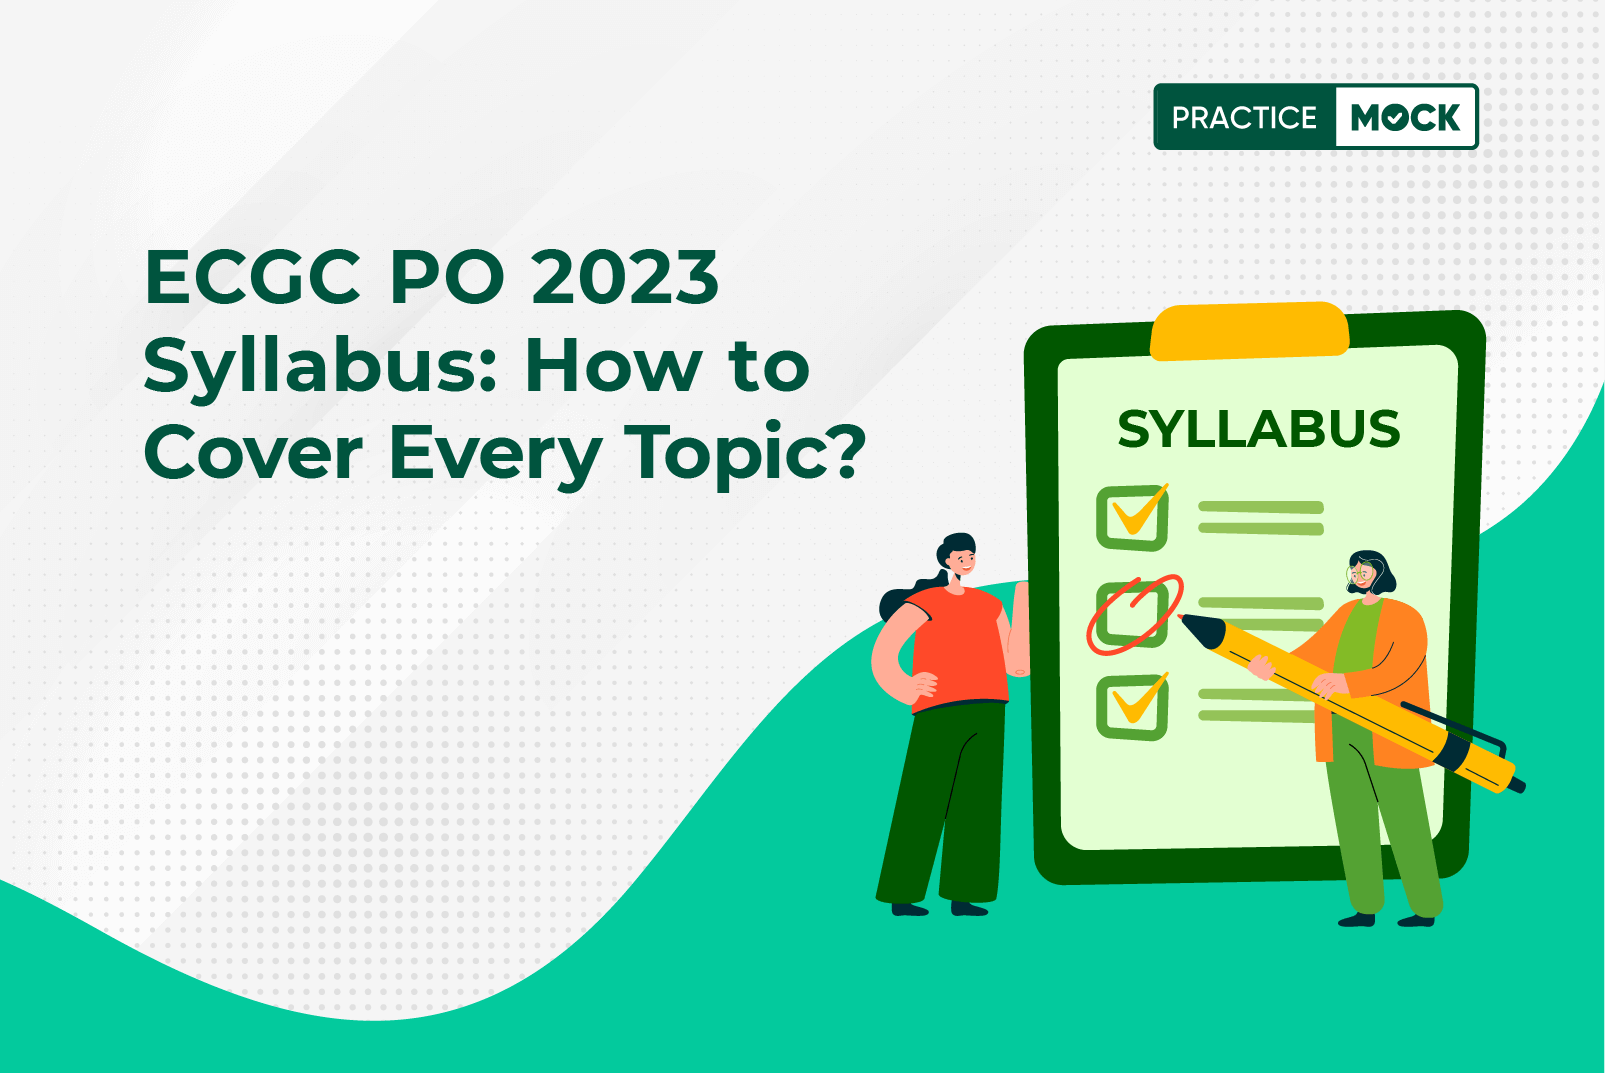 ECGC PO 2023 Syllabus-How to Cover Every Topic?